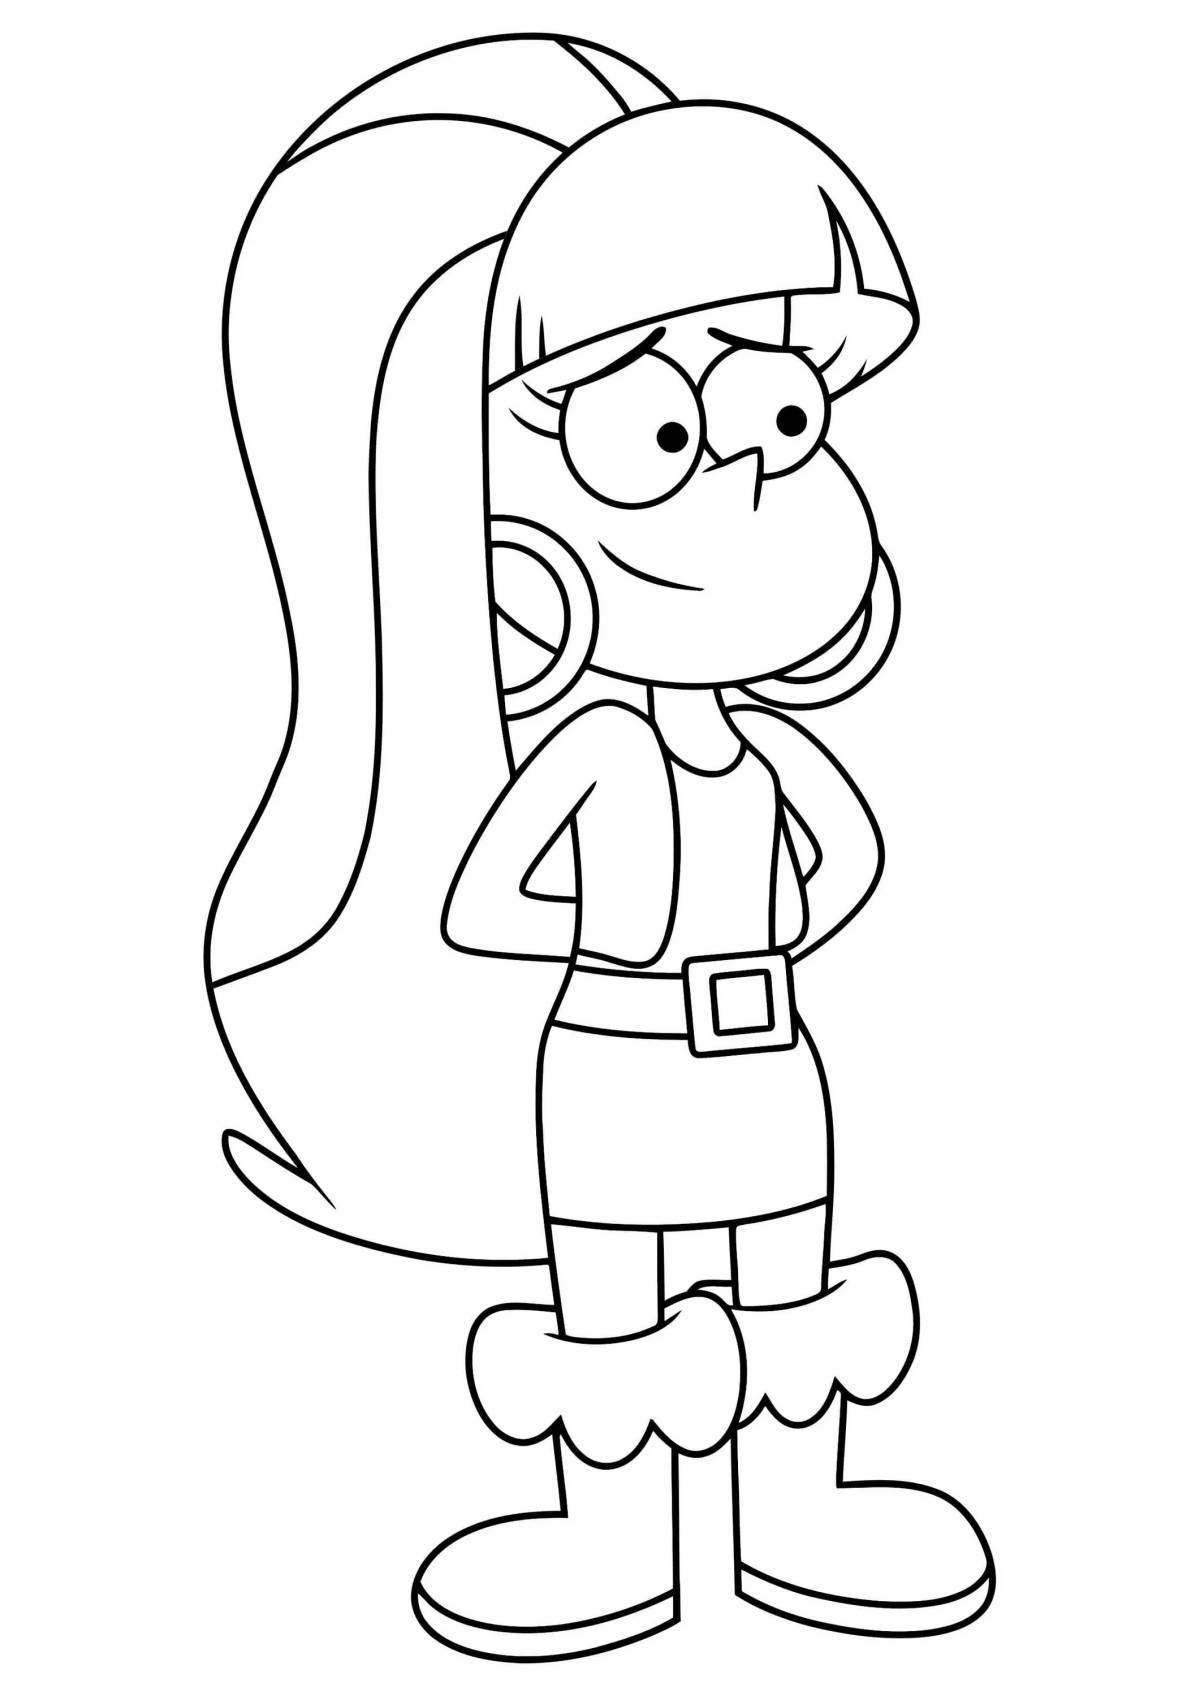 Coloring pages dipper and mabel in crazy color